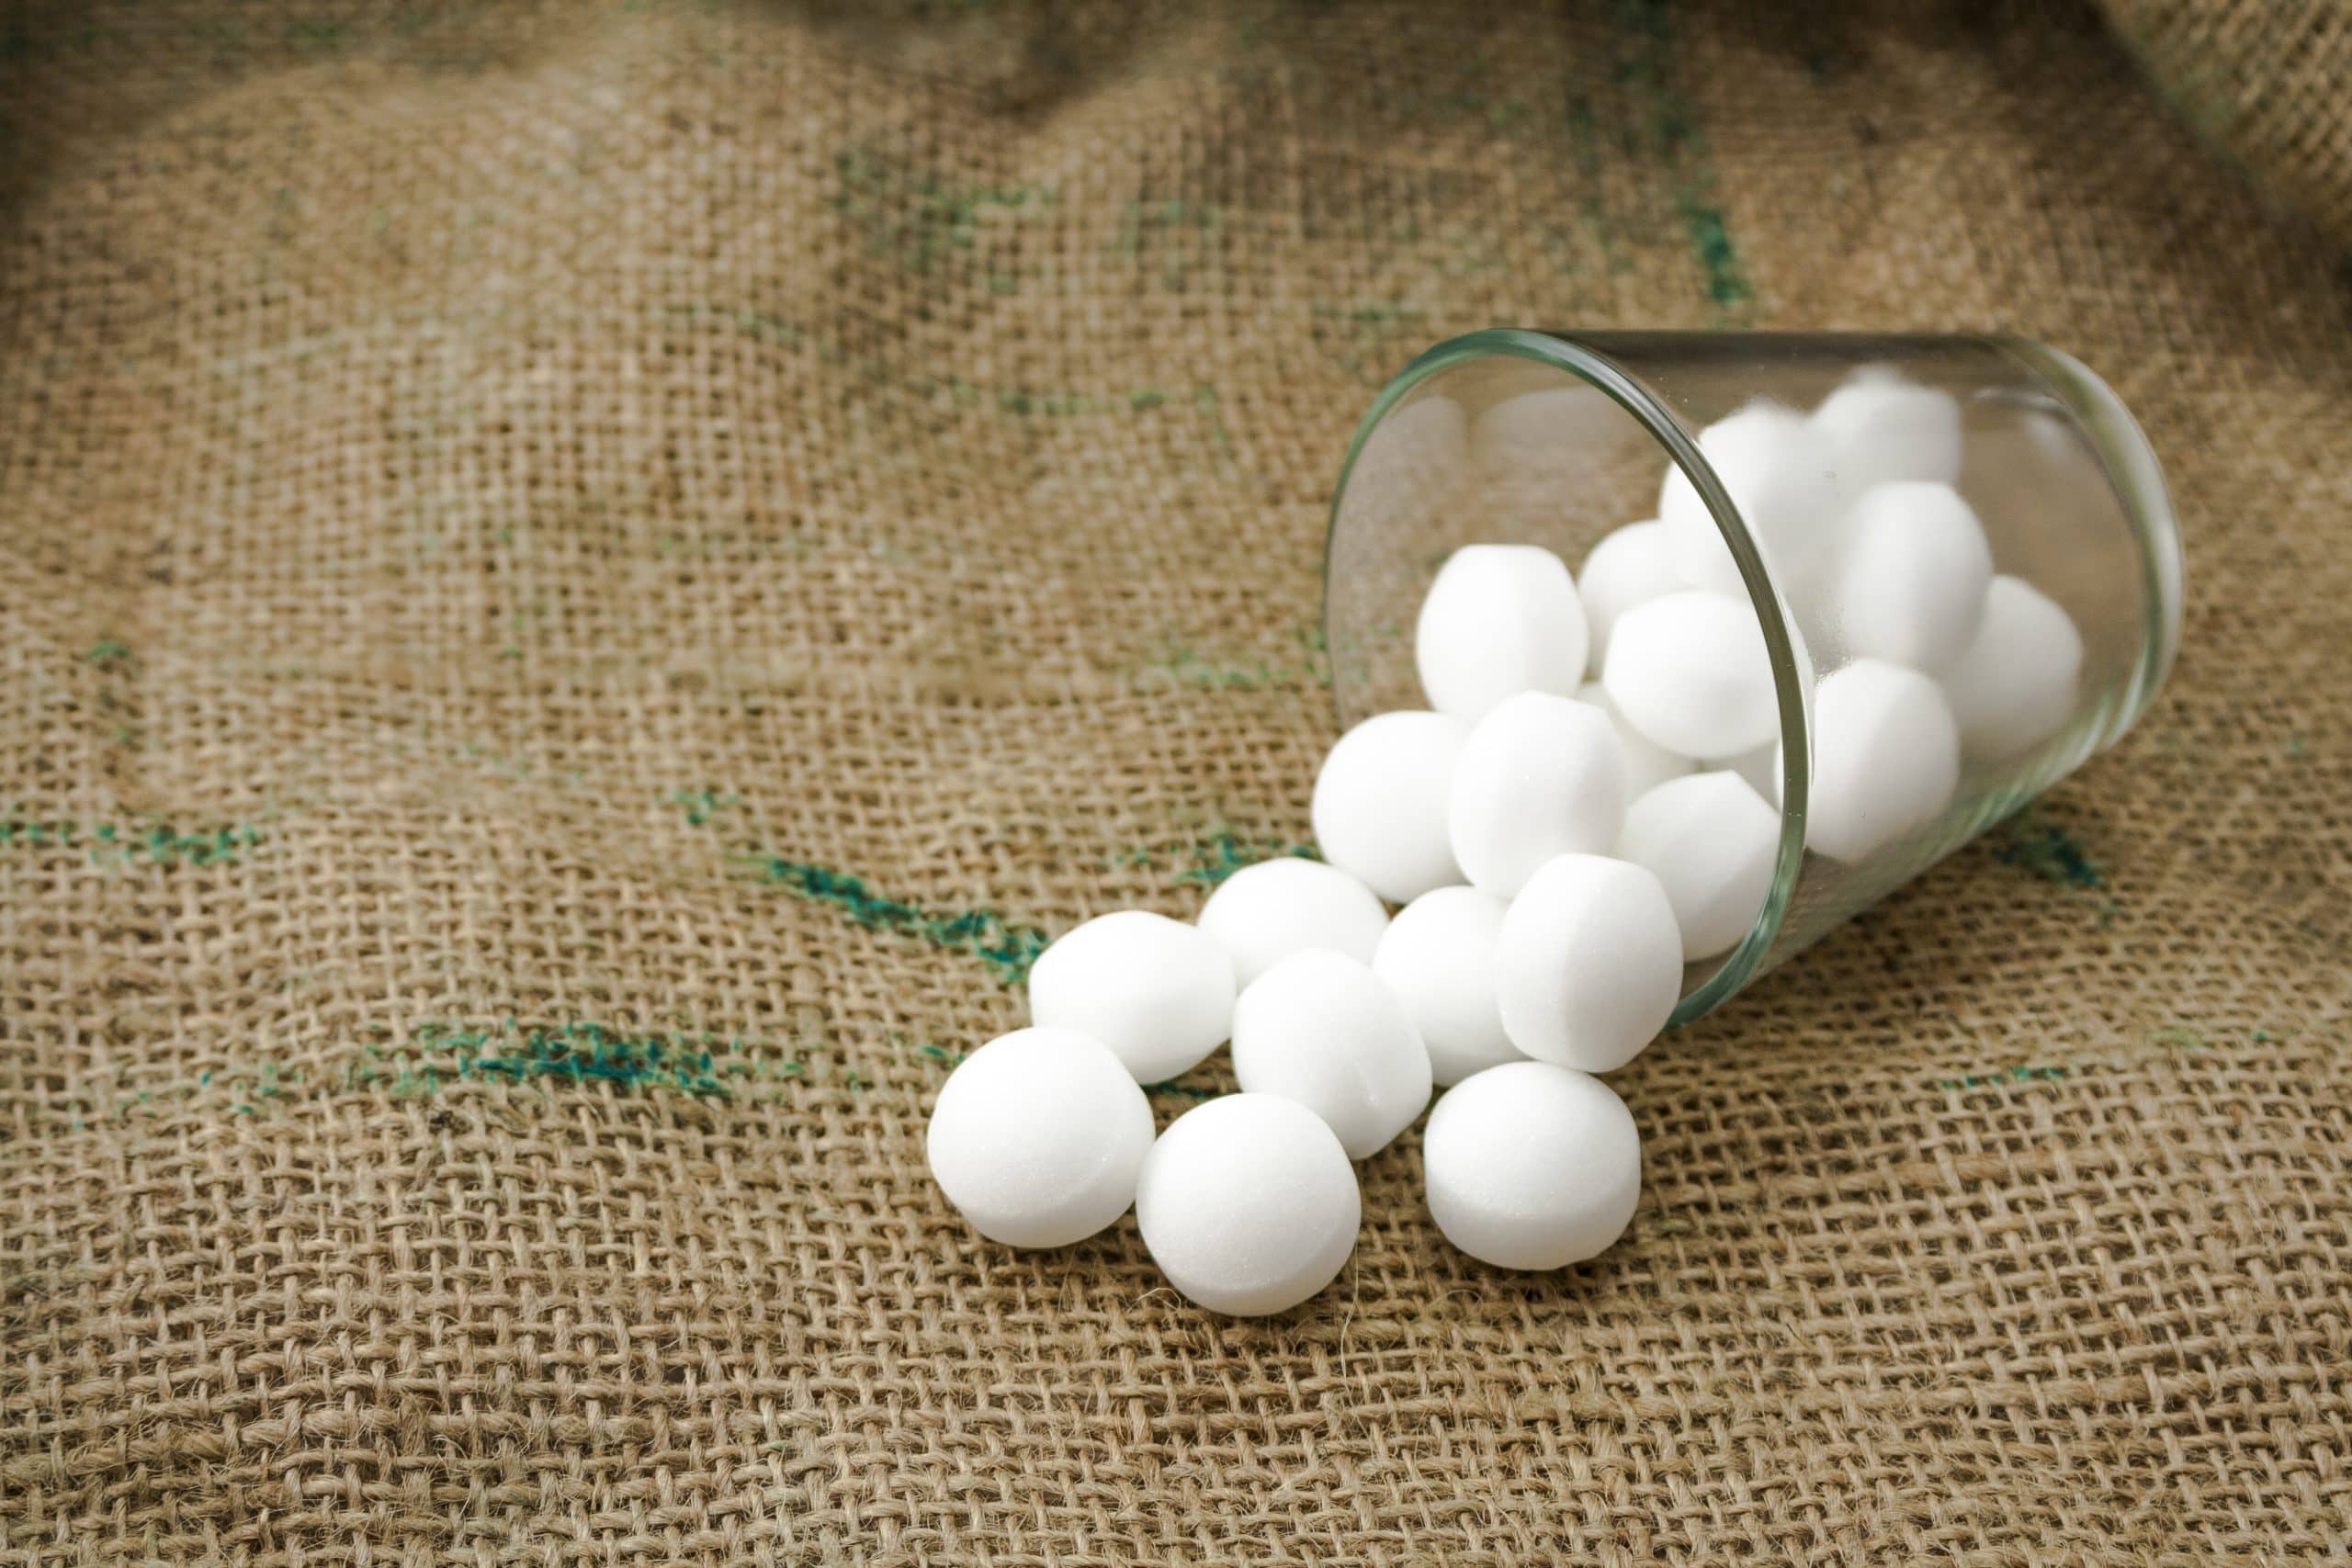 How To Use Mothballs In The Kitchen Pantry? What Should Be Done